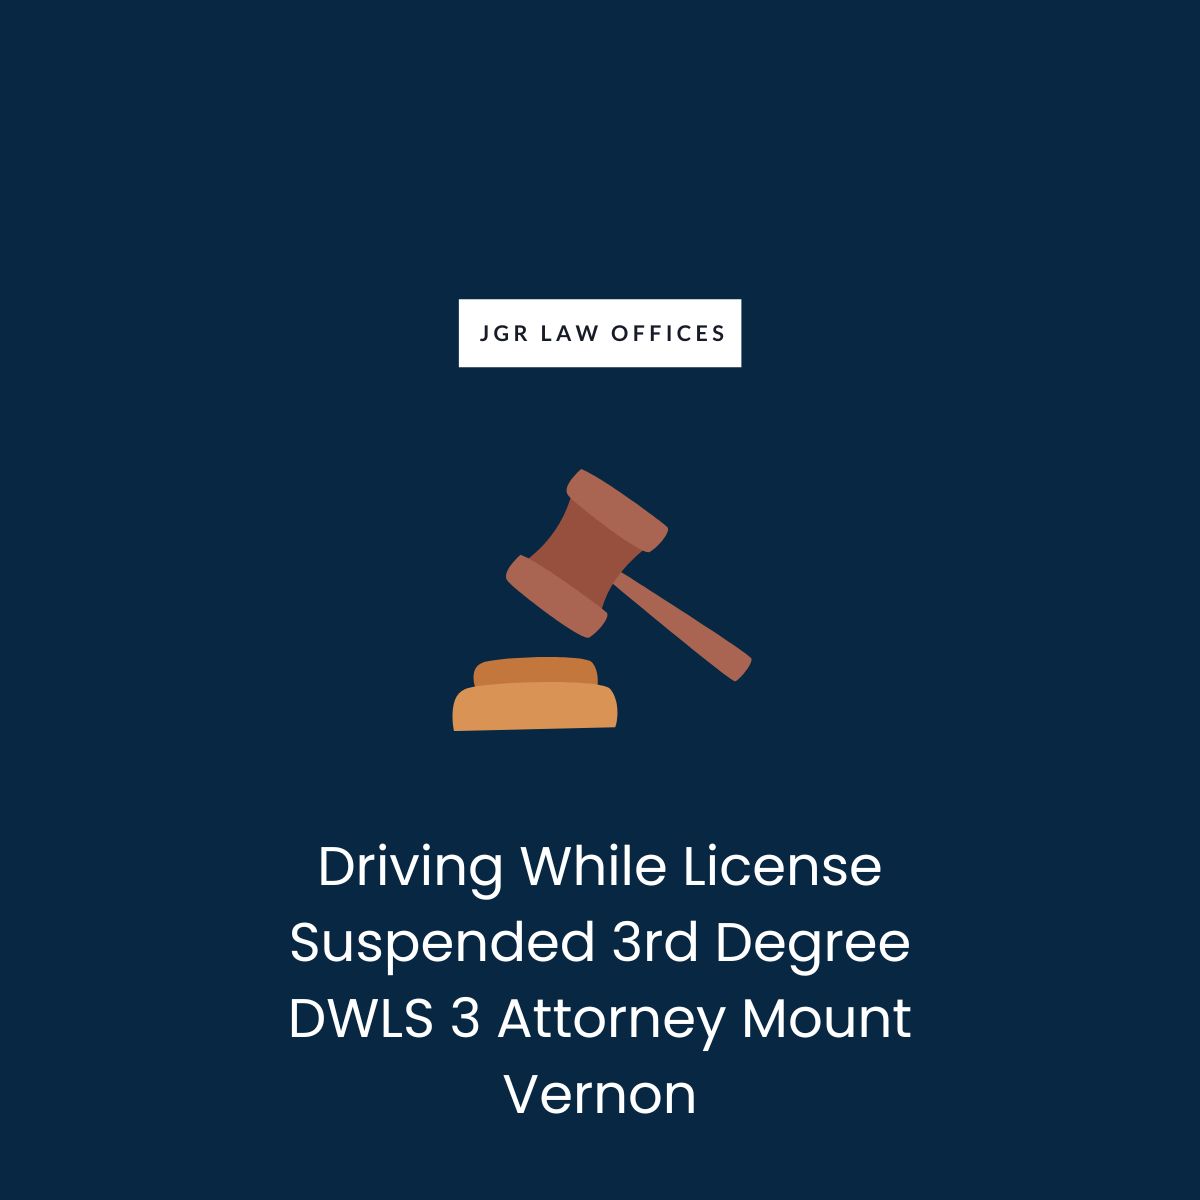 Driving While License Suspended 3rd Degree DWLS 3 Attorney Mount Vernon Driving While License Suspended 3rd Degree DWLS 3